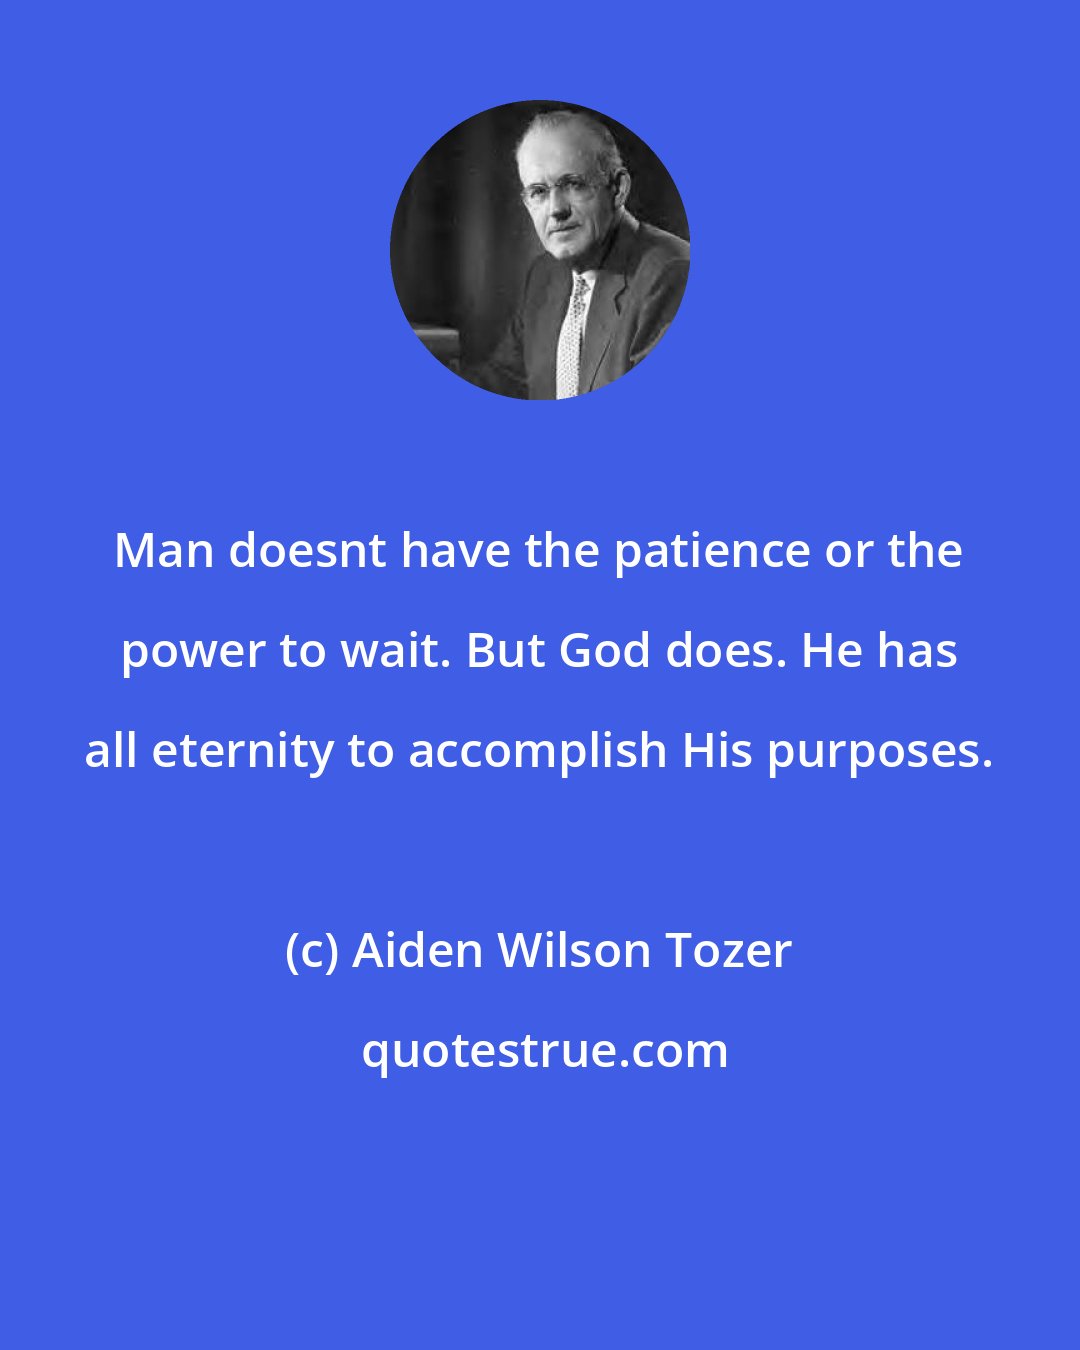 Aiden Wilson Tozer: Man doesnt have the patience or the power to wait. But God does. He has all eternity to accomplish His purposes.